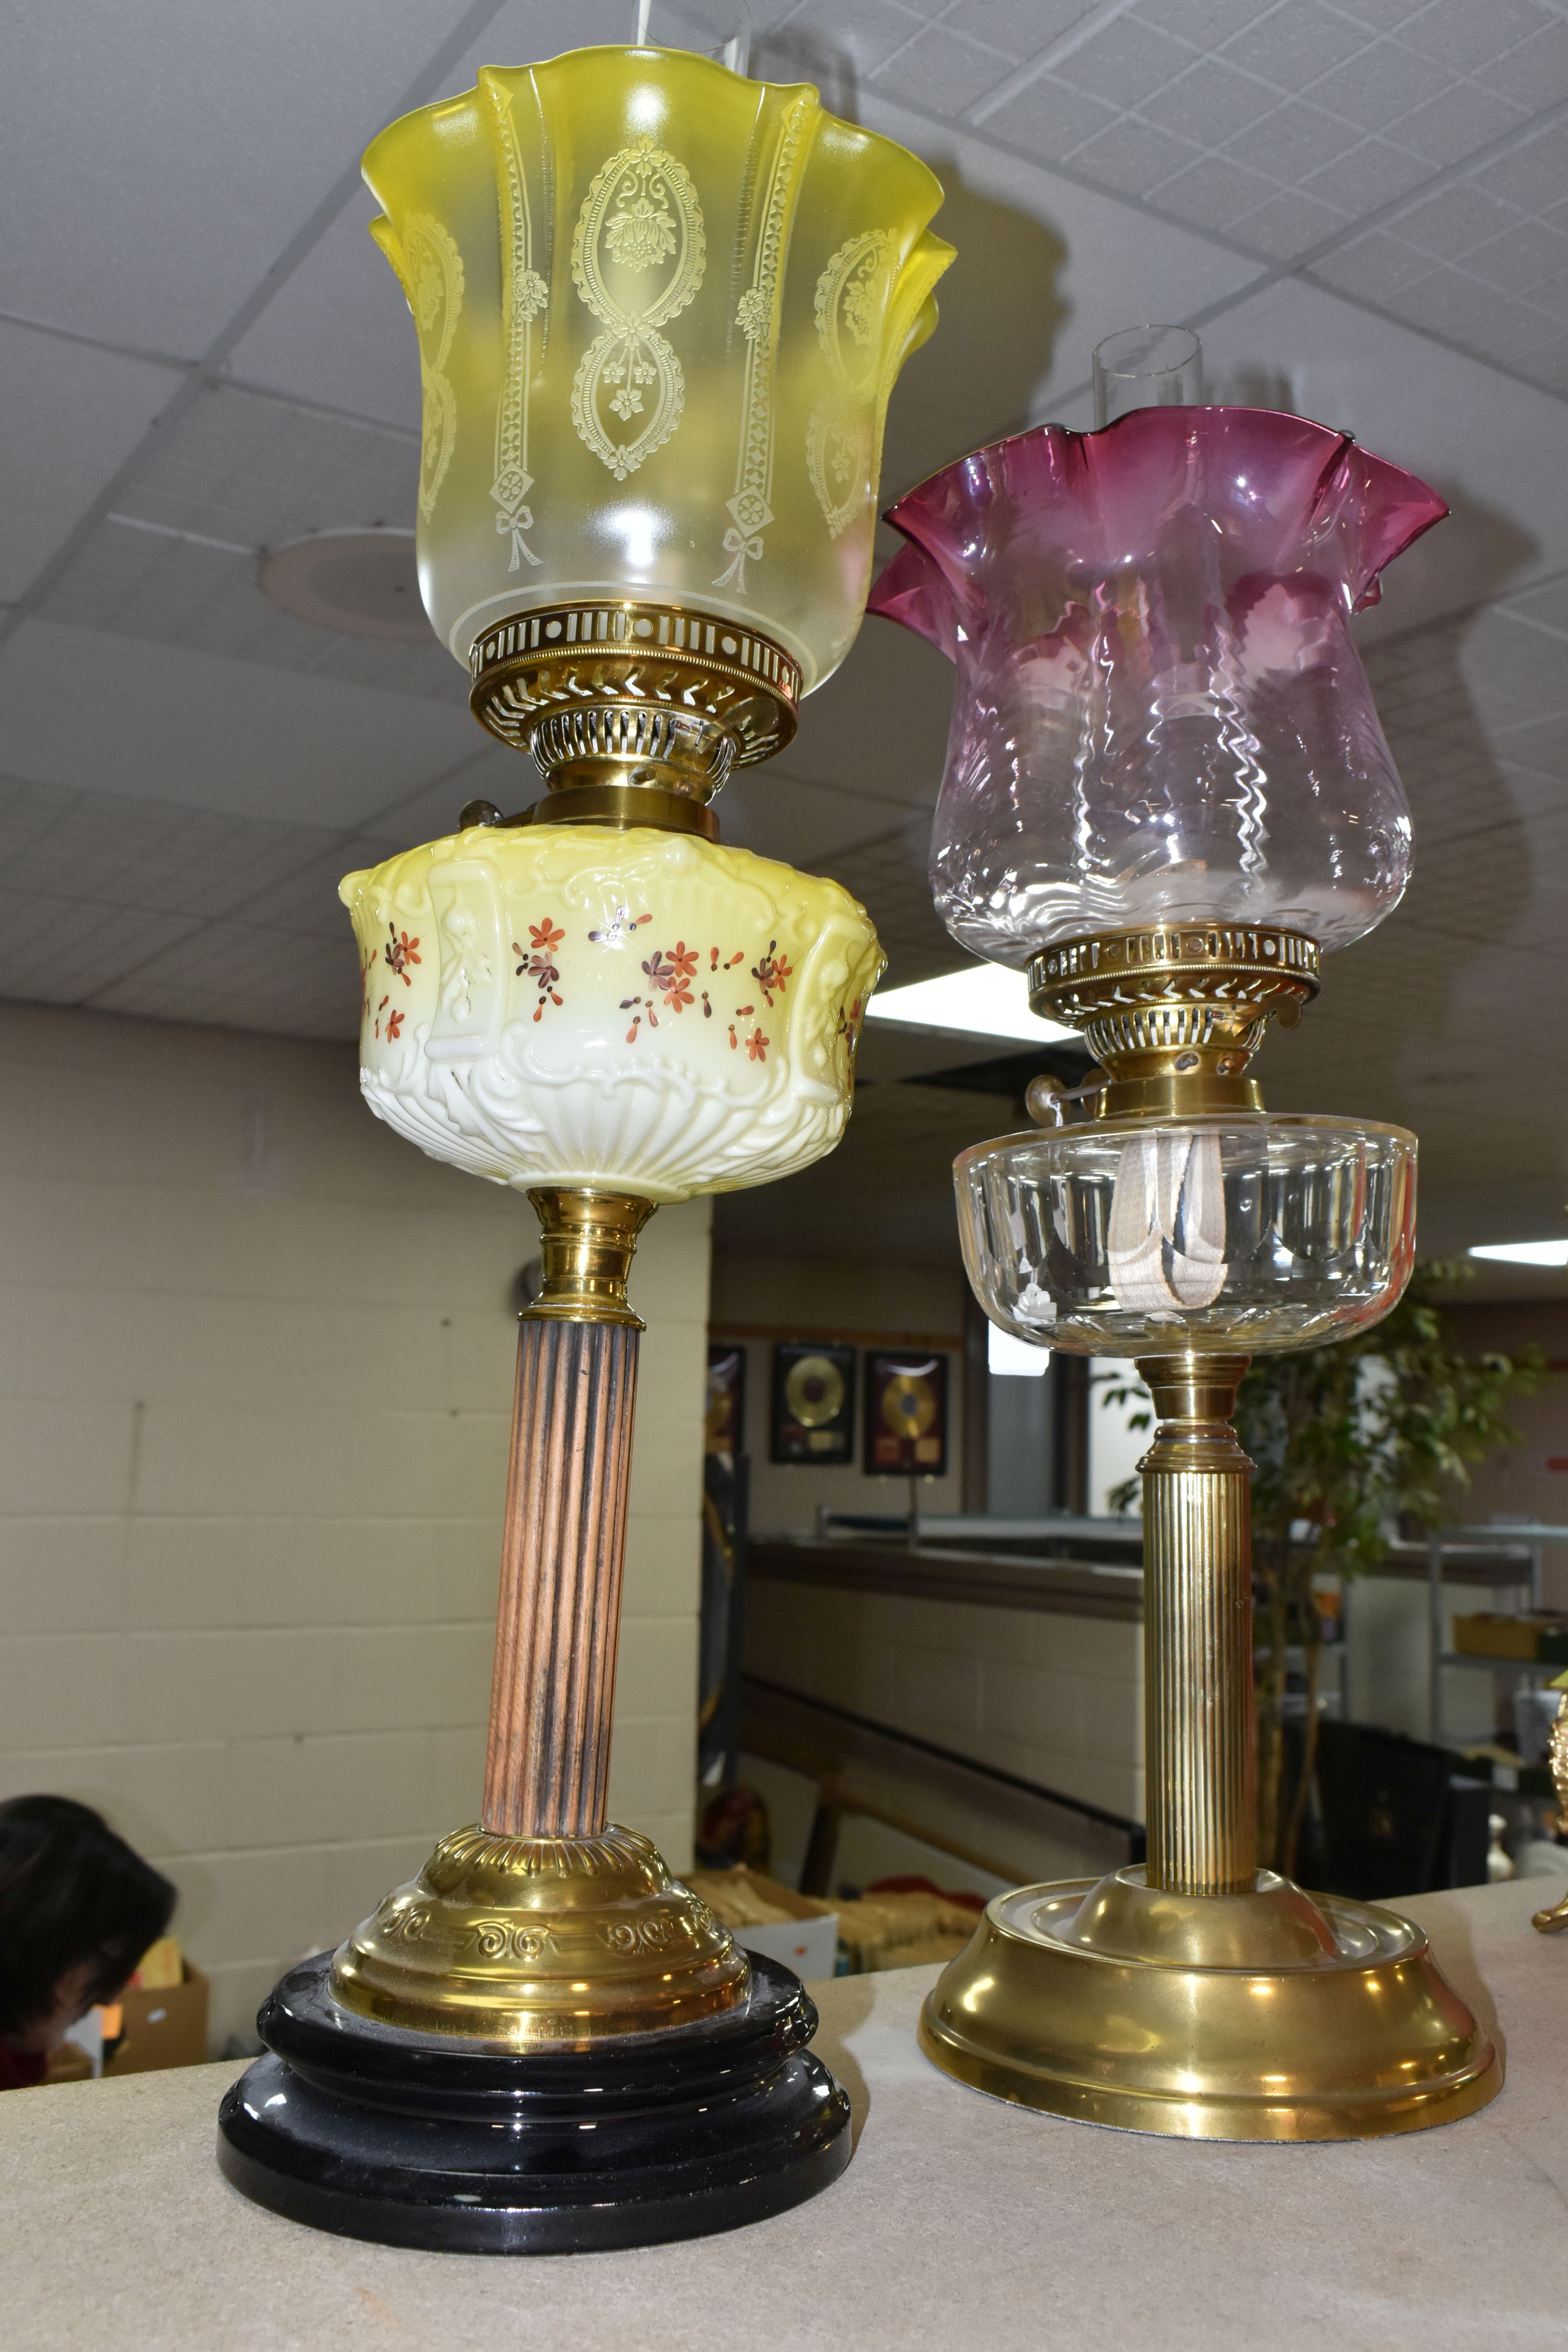 TWO VICTORIAN OIL LAMPS, one has an etched yellow glass shade, moulded yellow milk glass reservoir - Image 9 of 10